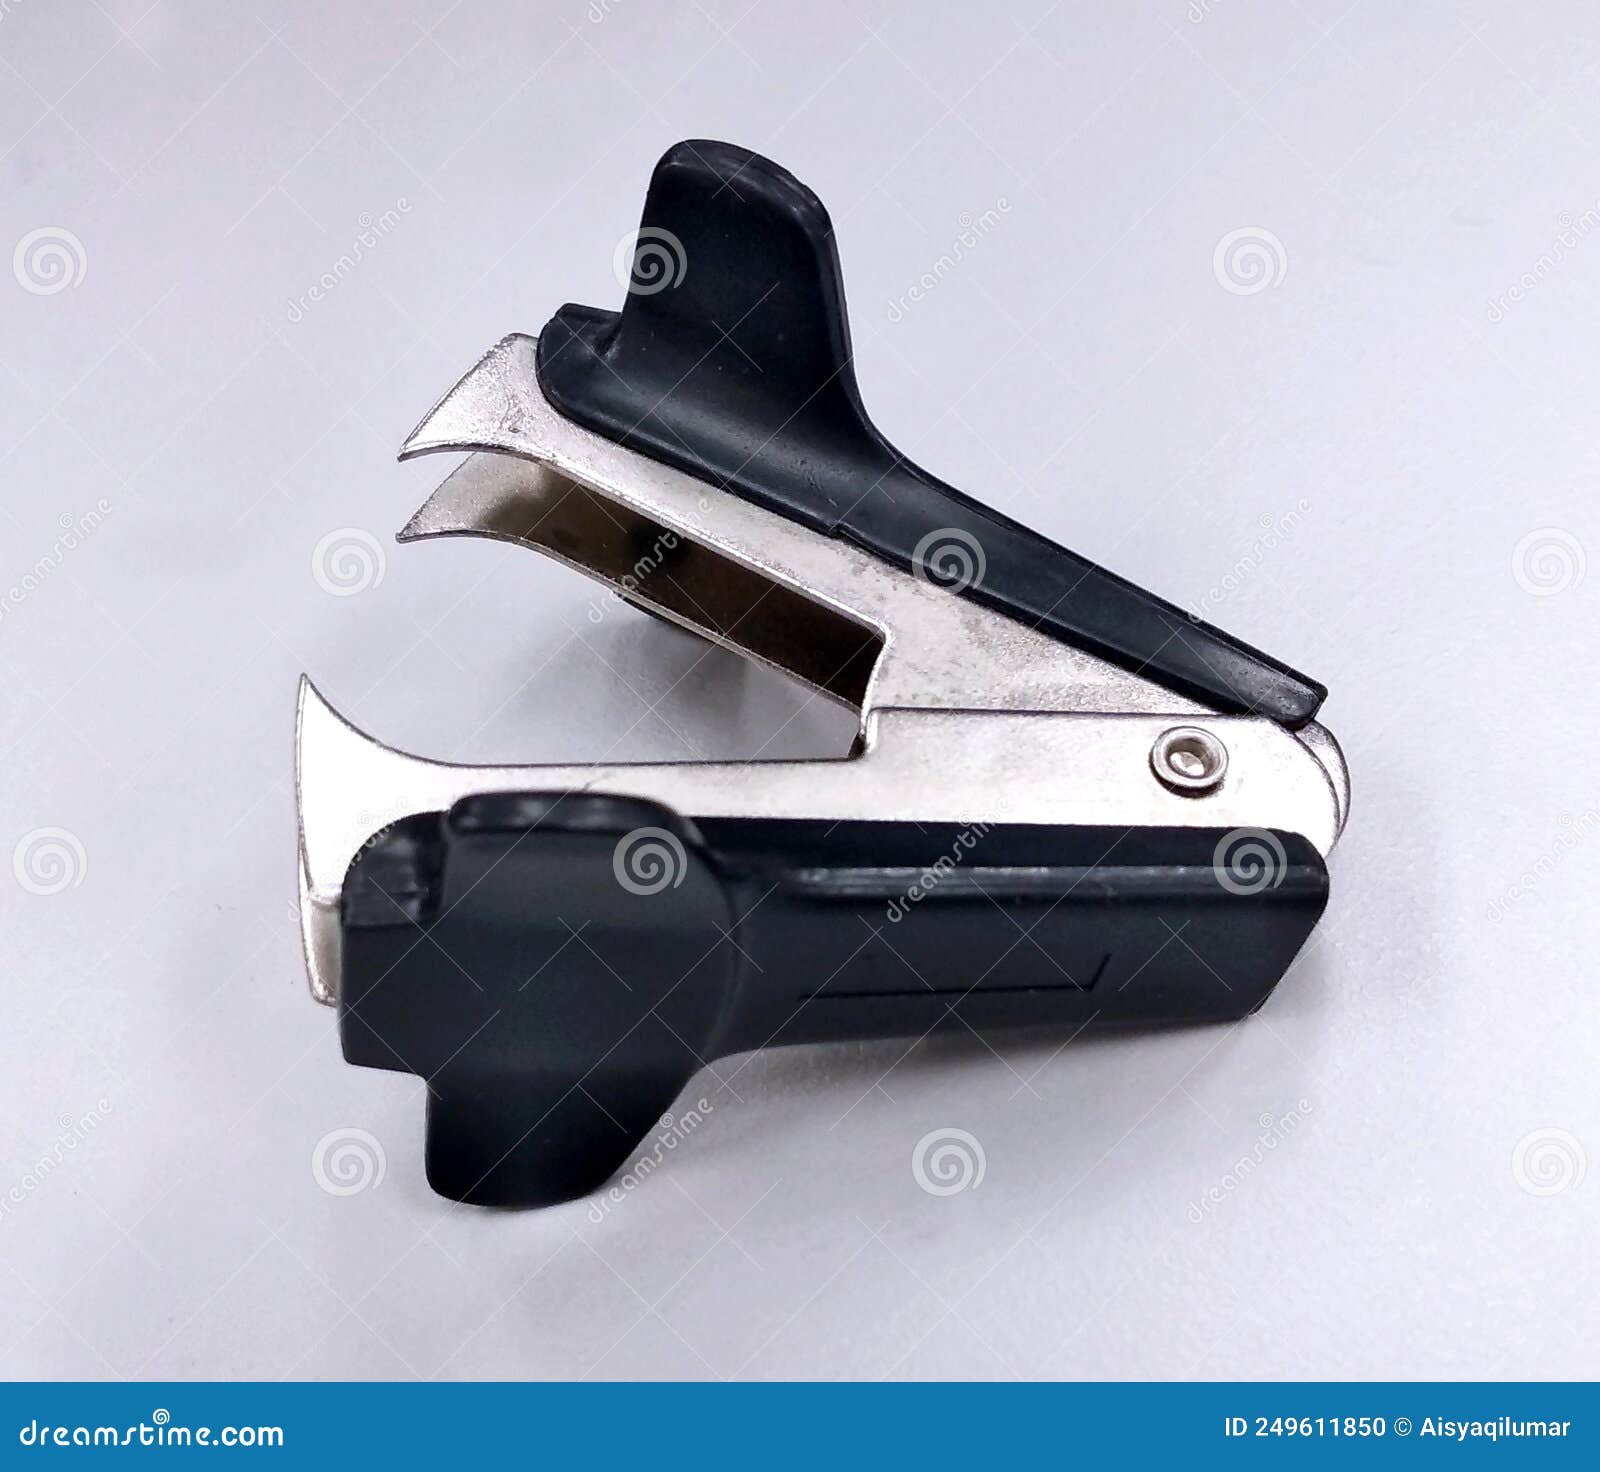 Old Staple Puller or Staple Remover Isolated on White Background. Stock  Photo - Image of binder, object: 249611850